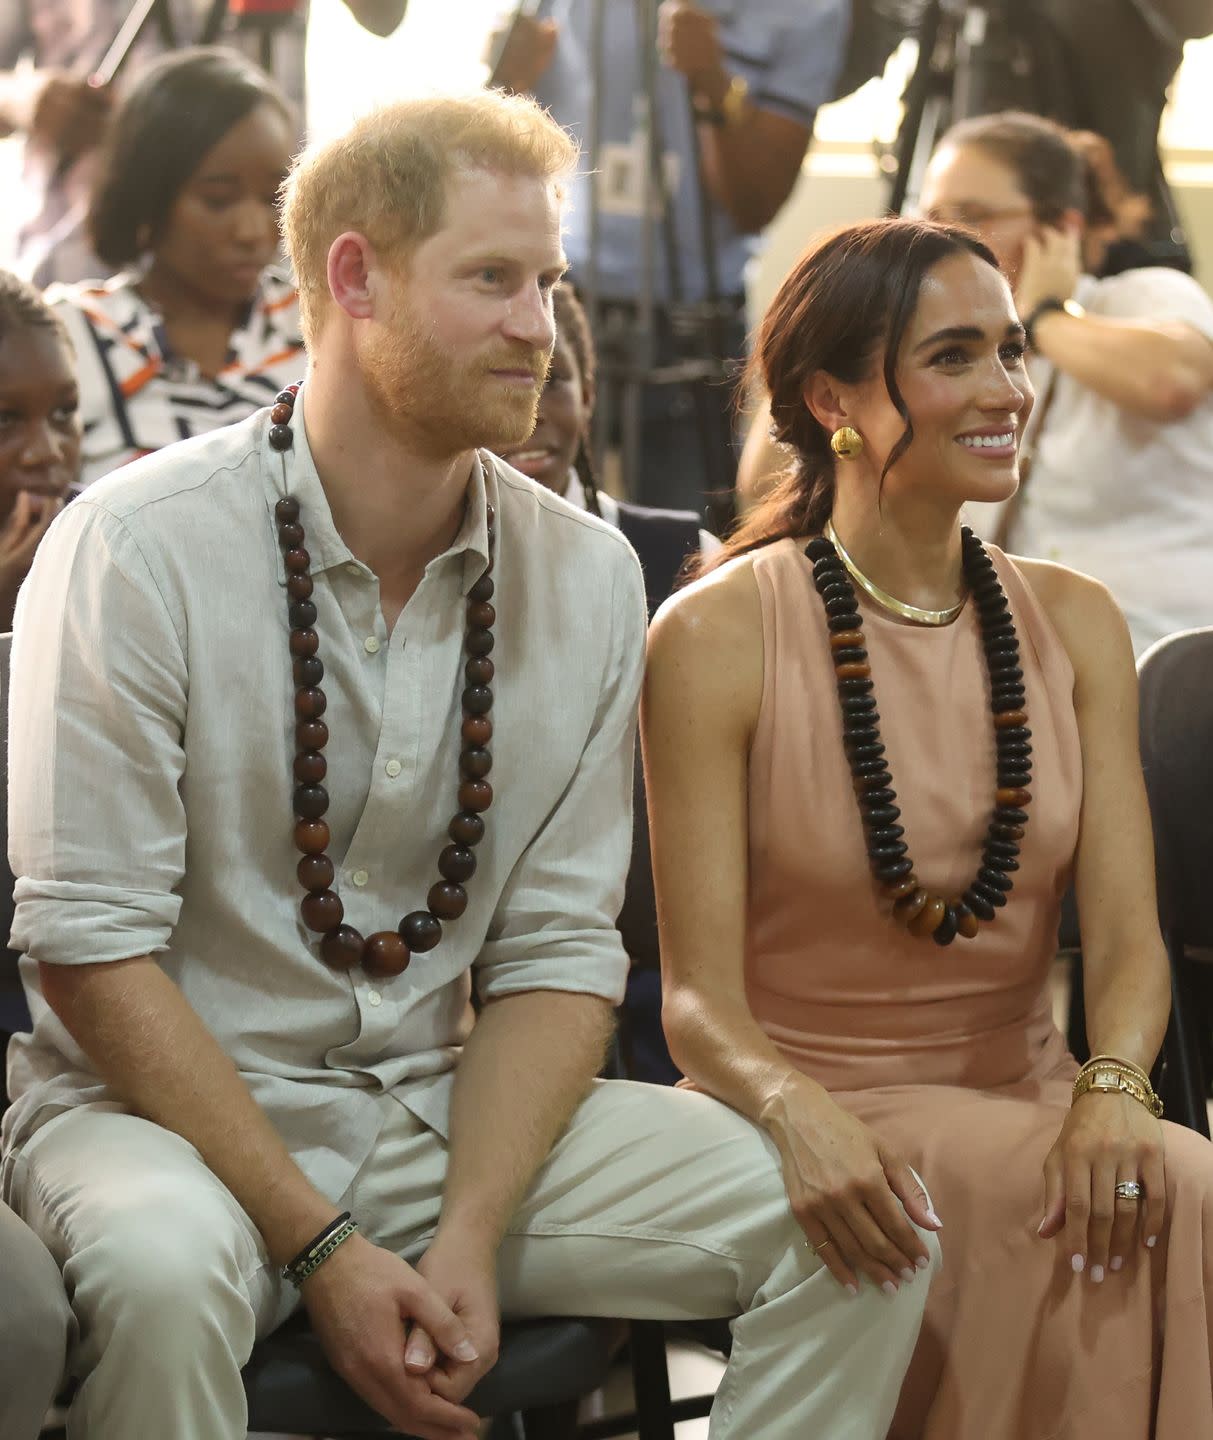 abuja, nigeria may 10 duke of sussex prince harry l his wife meghan markle r, duchess of sussex, visit the lightway academy in abuja, nigeria as part of celebrations of invictus games anniversary on may 10, 2024 photo by emmanuel osodianadolu via getty images